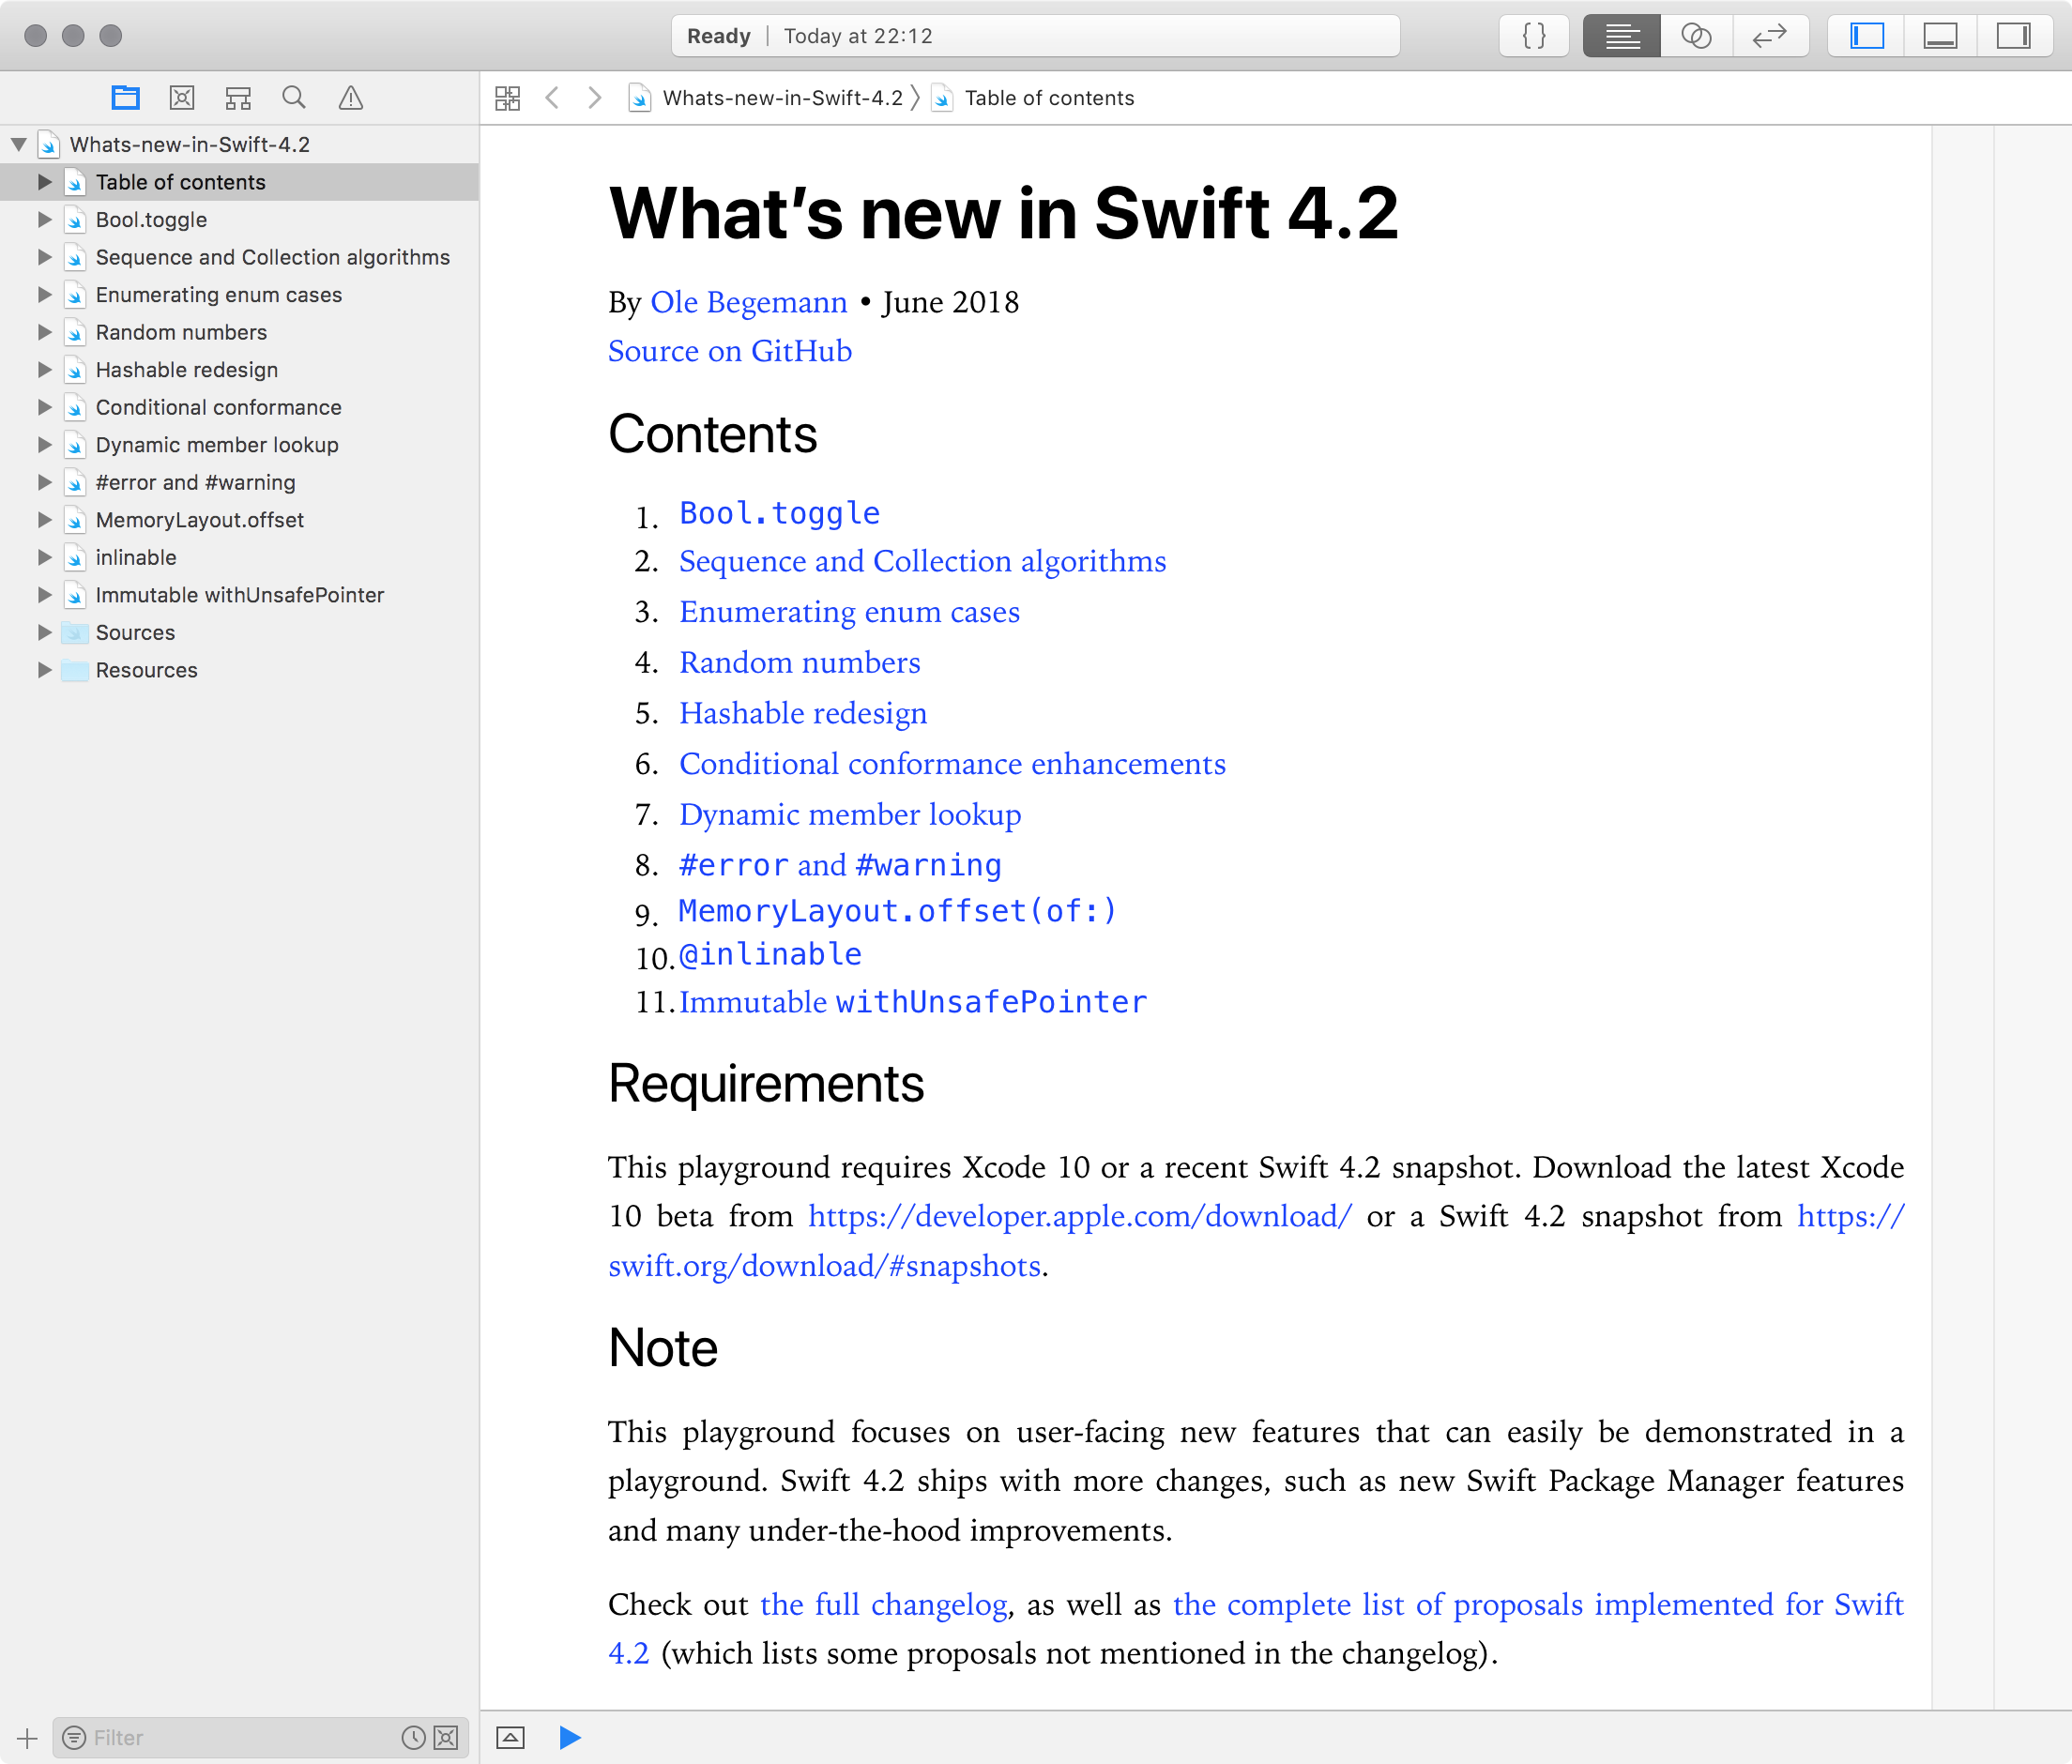 The What’s new in Swift 4.2 playground